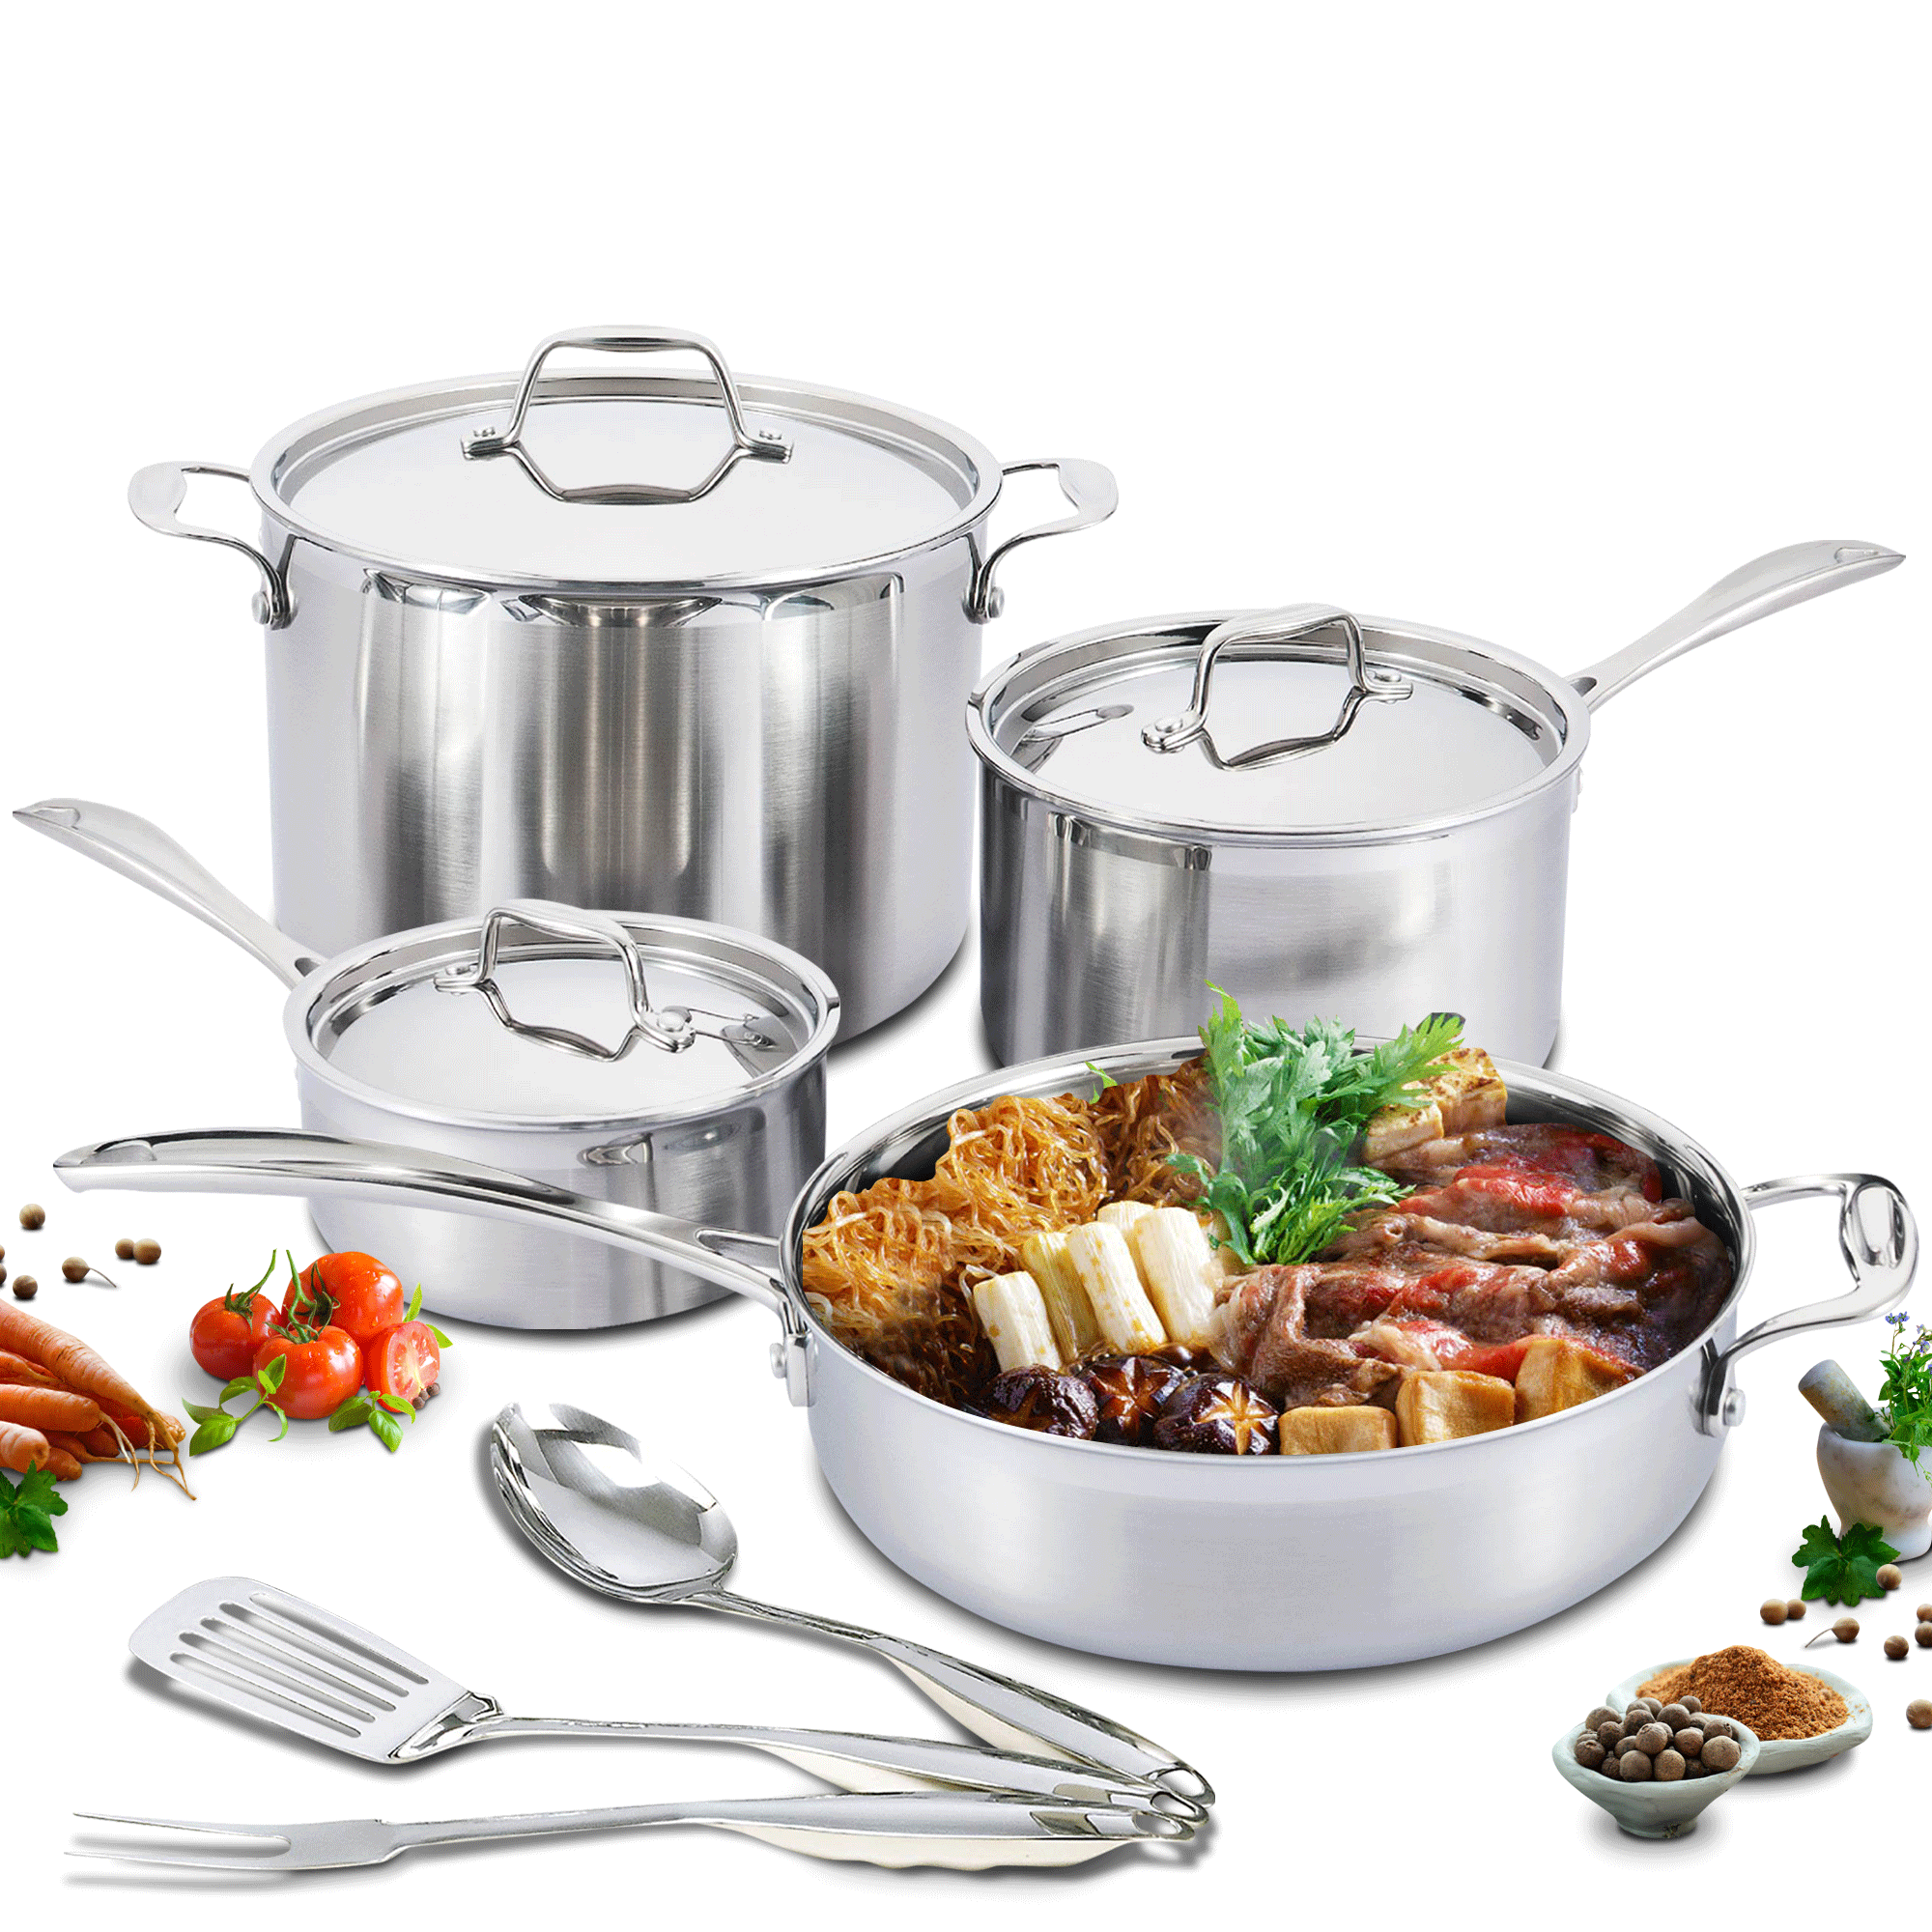 https://cdn.shopify.com/s/files/1/0269/3663/9541/products/10piececookware2-NEV_2000x.gif?v=1678222696